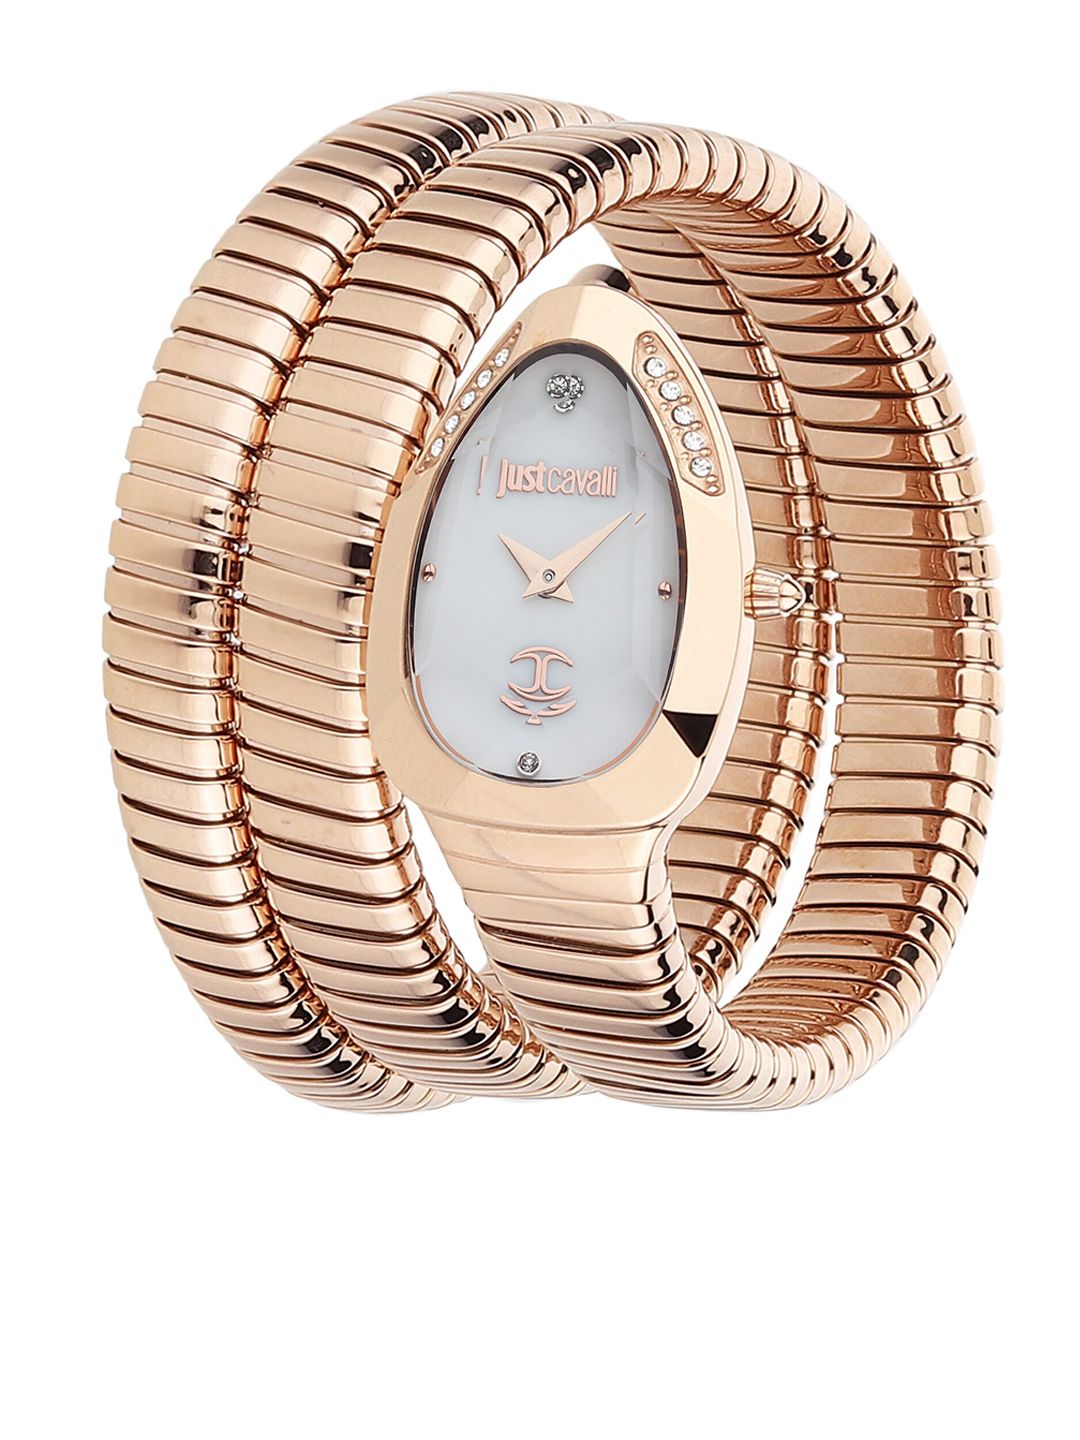 Just Cavalli Women White Brass Dial & Rose Gold Toned Straps Analogue Watch JC1L209M0055 Price in India